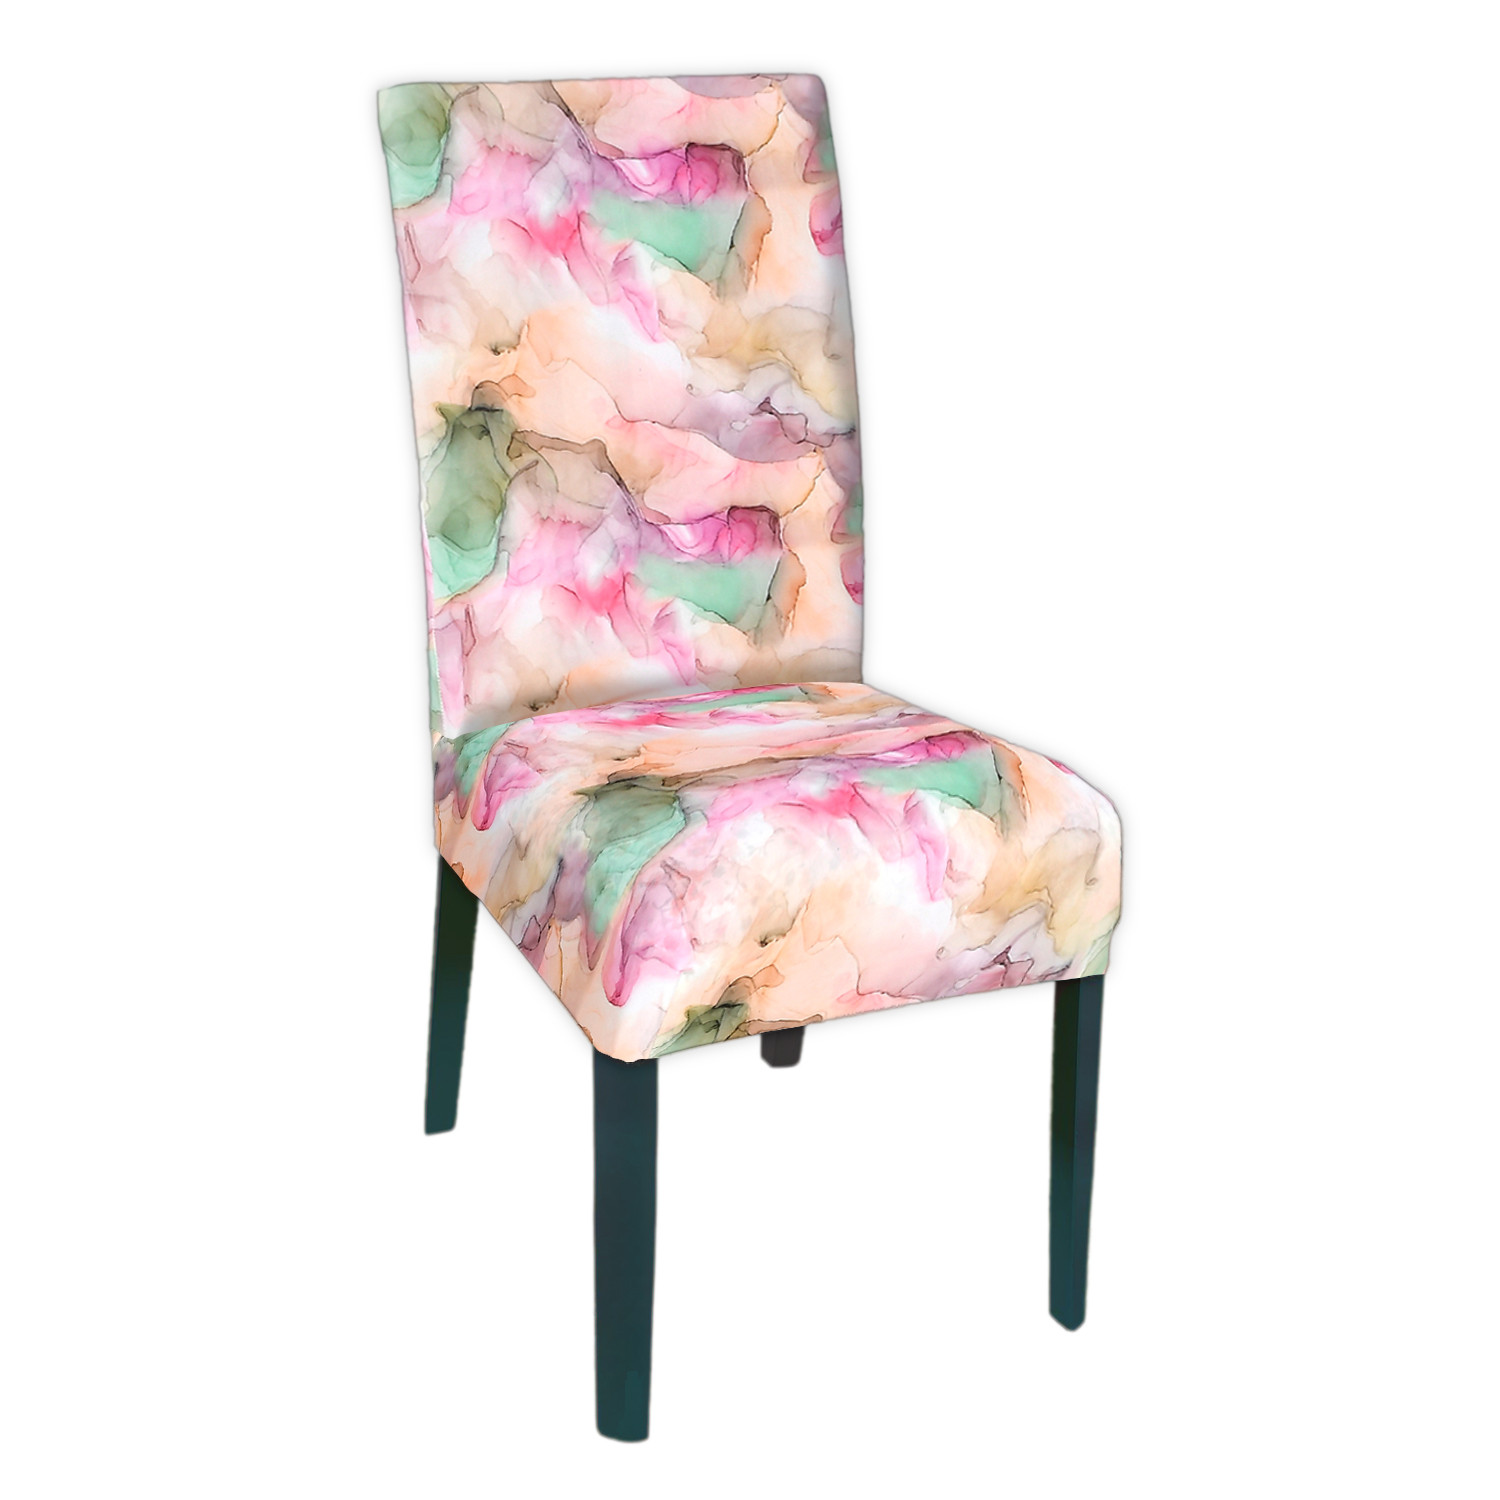 Kuber Industries Trippy Printed Elastic Stretchable Polyster Chair Cover For Home, Office, Hotels, Wedding Banquet (Multicolor)